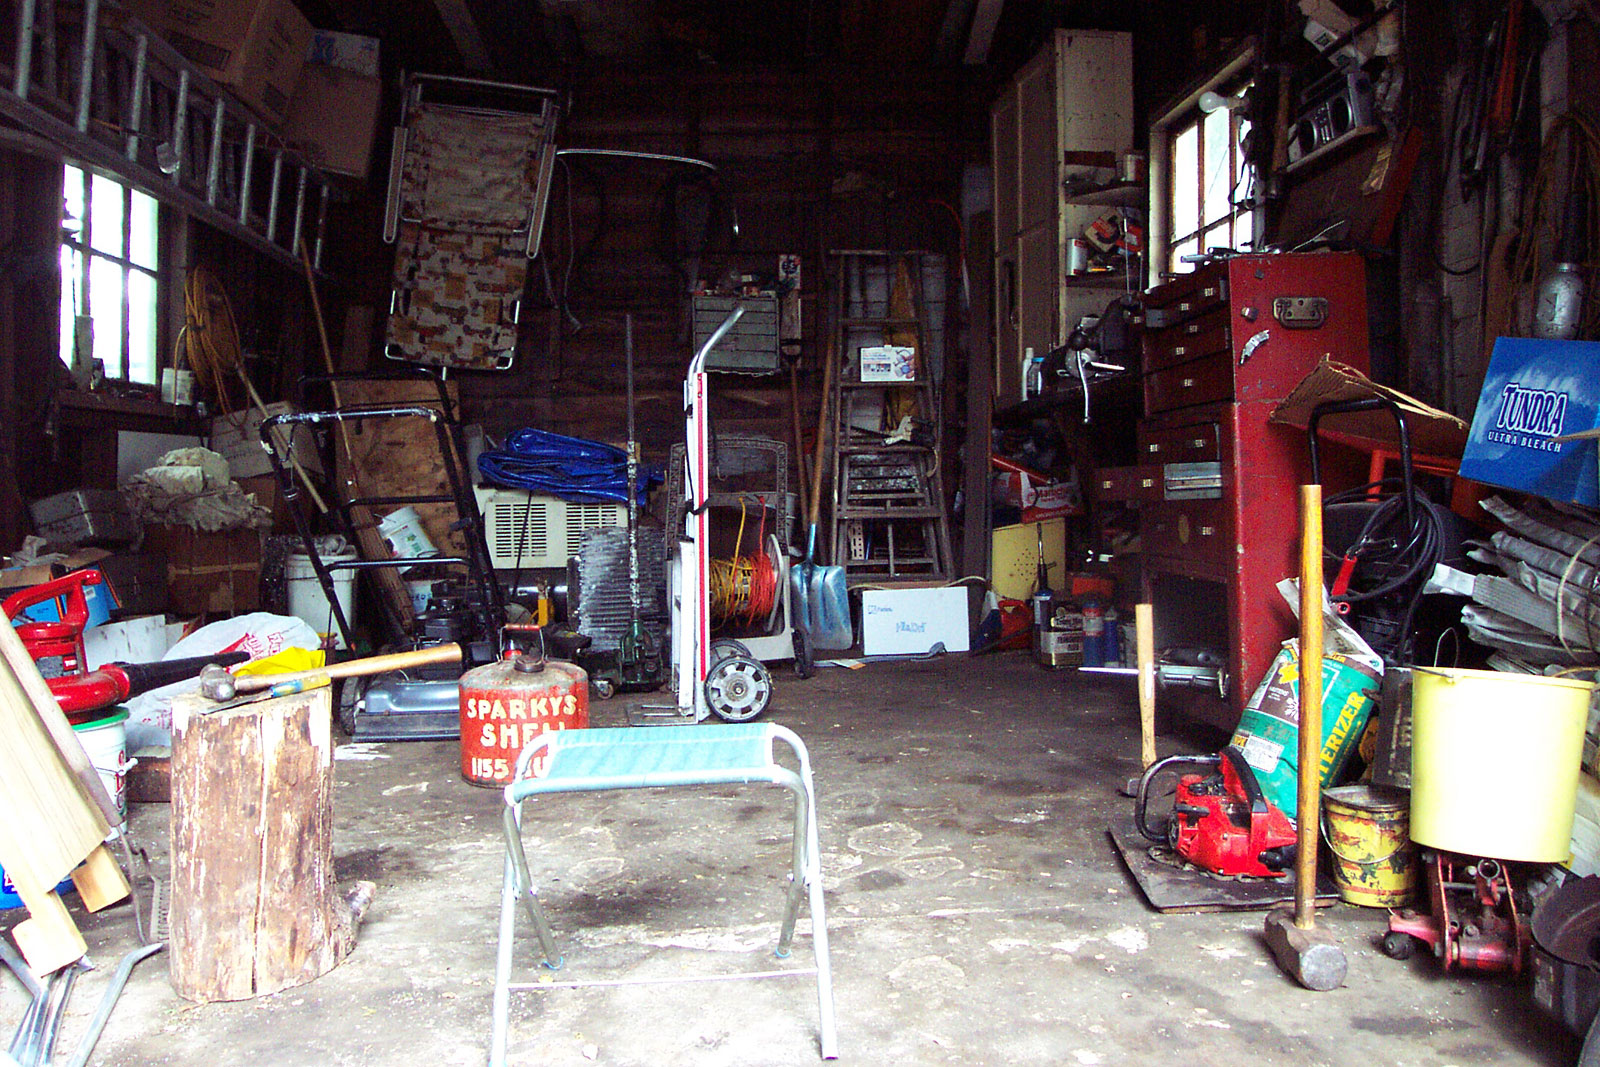 Inside Sparky's garage on Hall Street in Rochester, New York